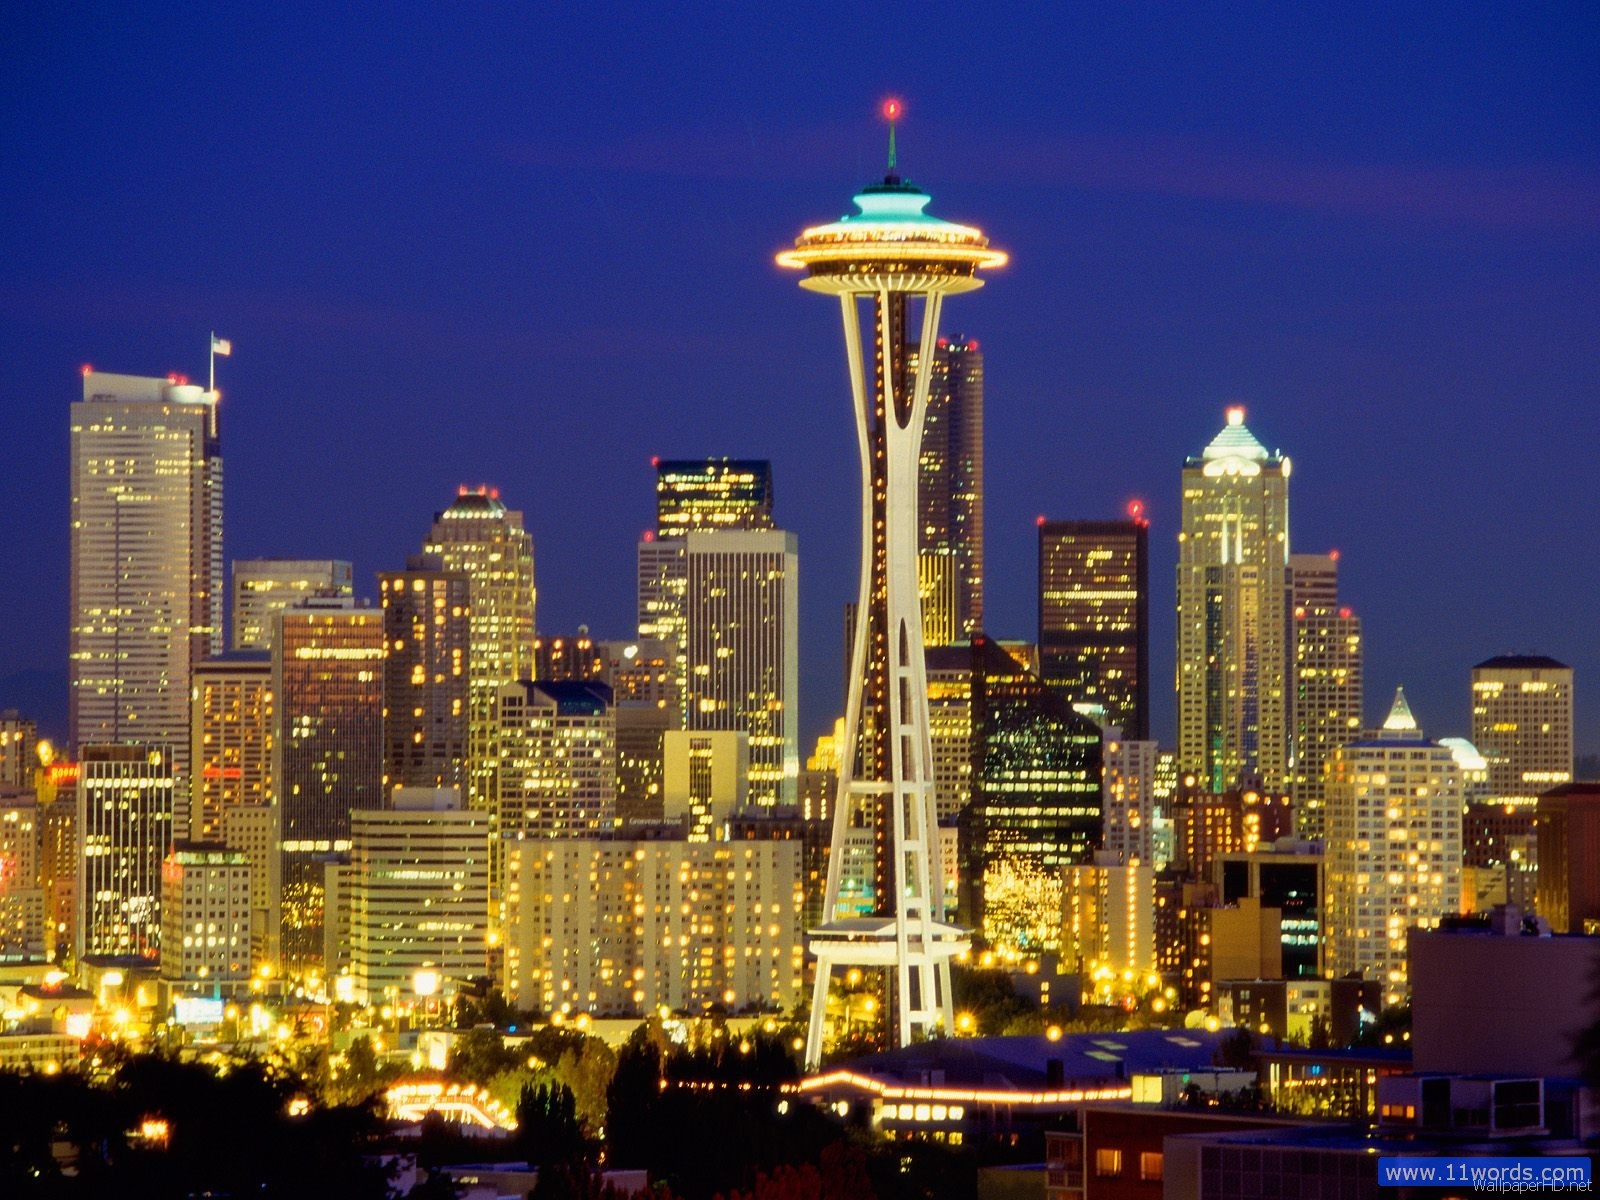 Preety Seattle HD Wallpaper Photos Image And Pics Send By